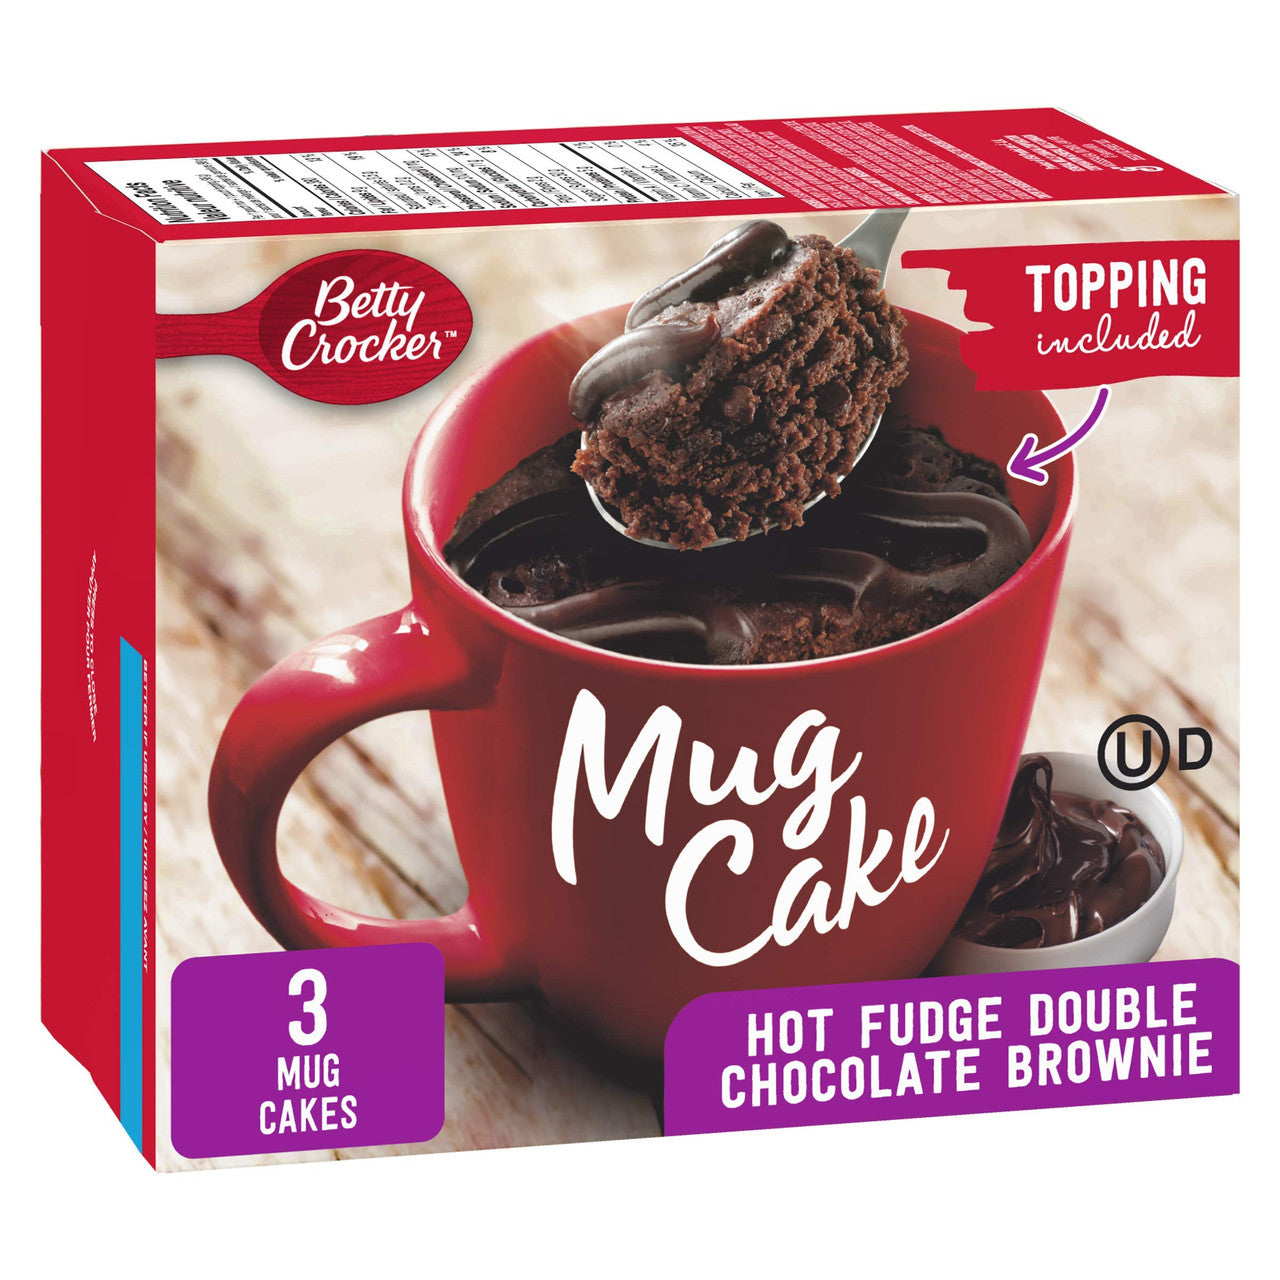 Betty Crocker Mug Cake Hot Fudge Double Chocolate Brownie With Fudge Topping, 294g/10.4 oz., {Imported from Canada}